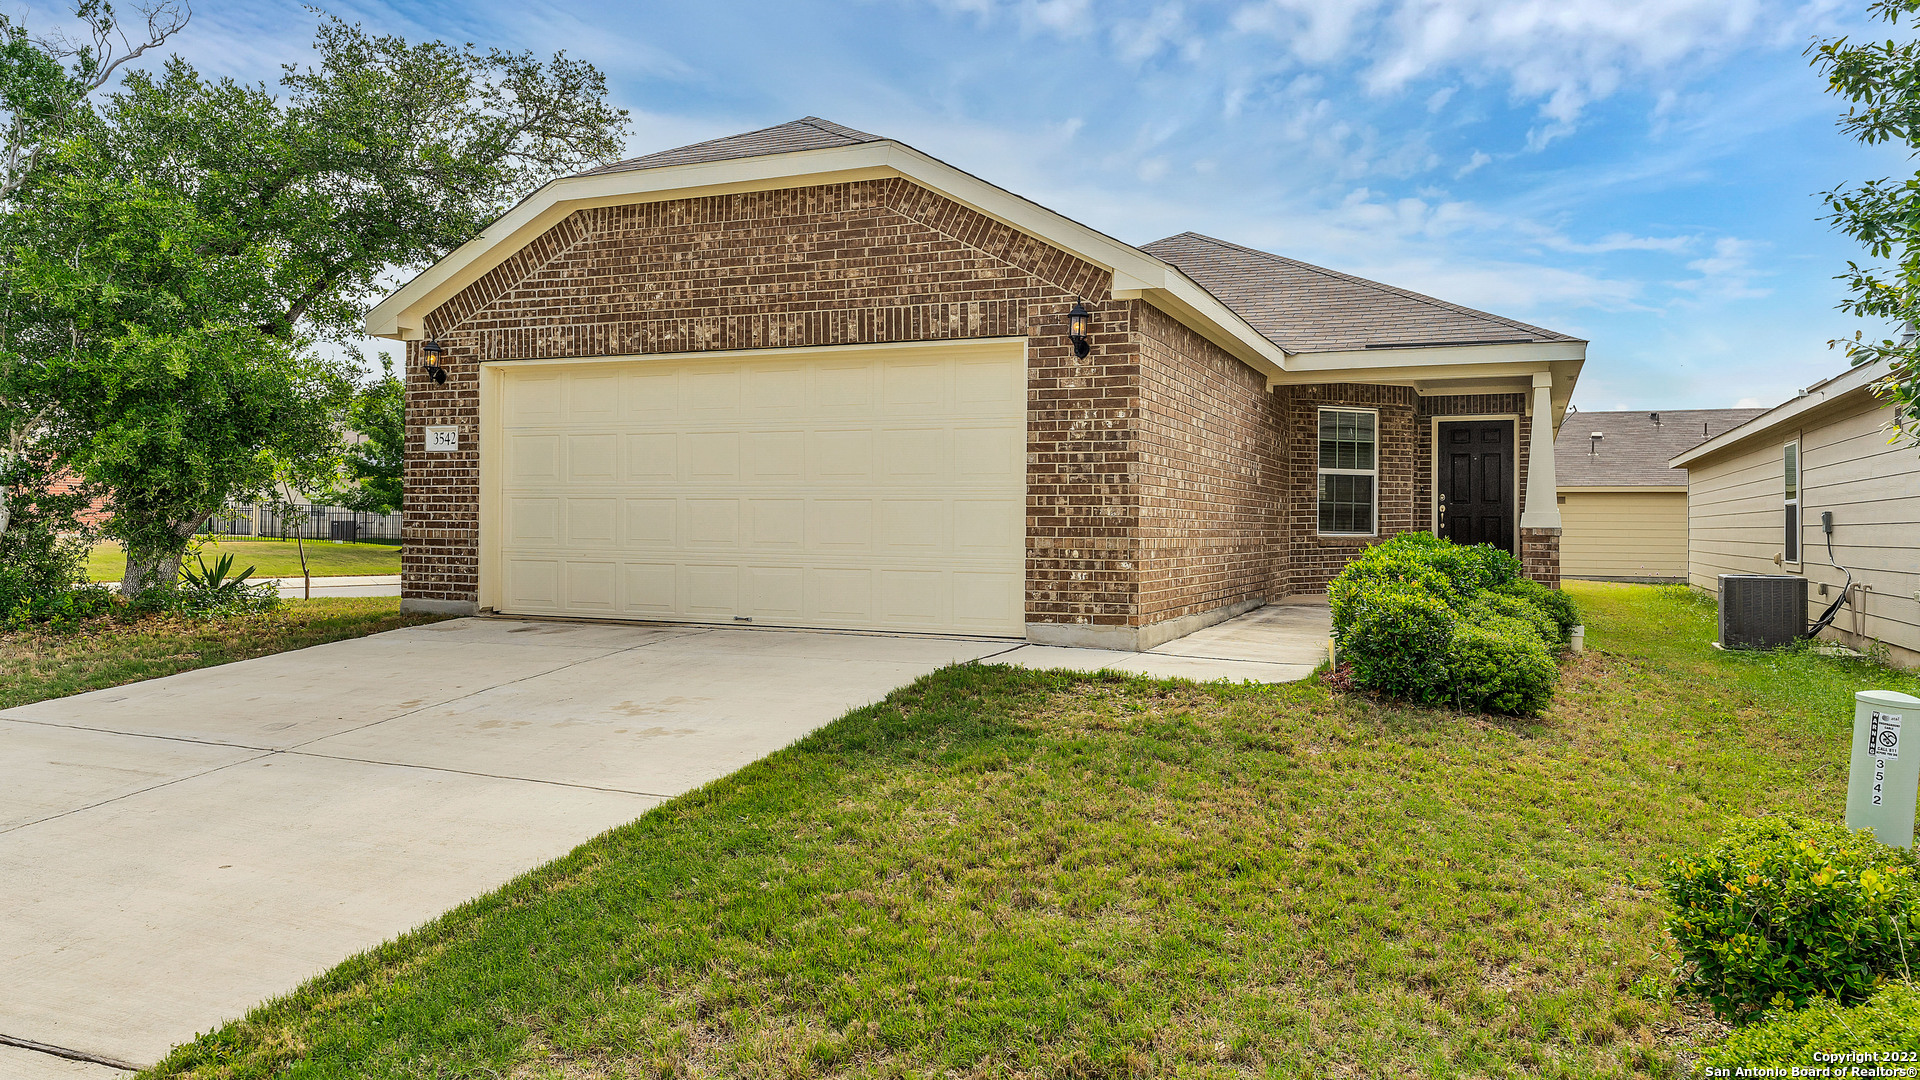 This charming home is located in Del Webb's 55+ Premier Adult Community at Hill Country Retreat. Home is a single story, 2 bedroom, 2 bath. Move in ready! Home sits on a corner lot. Home includes a washer, dryer and refrigerator.